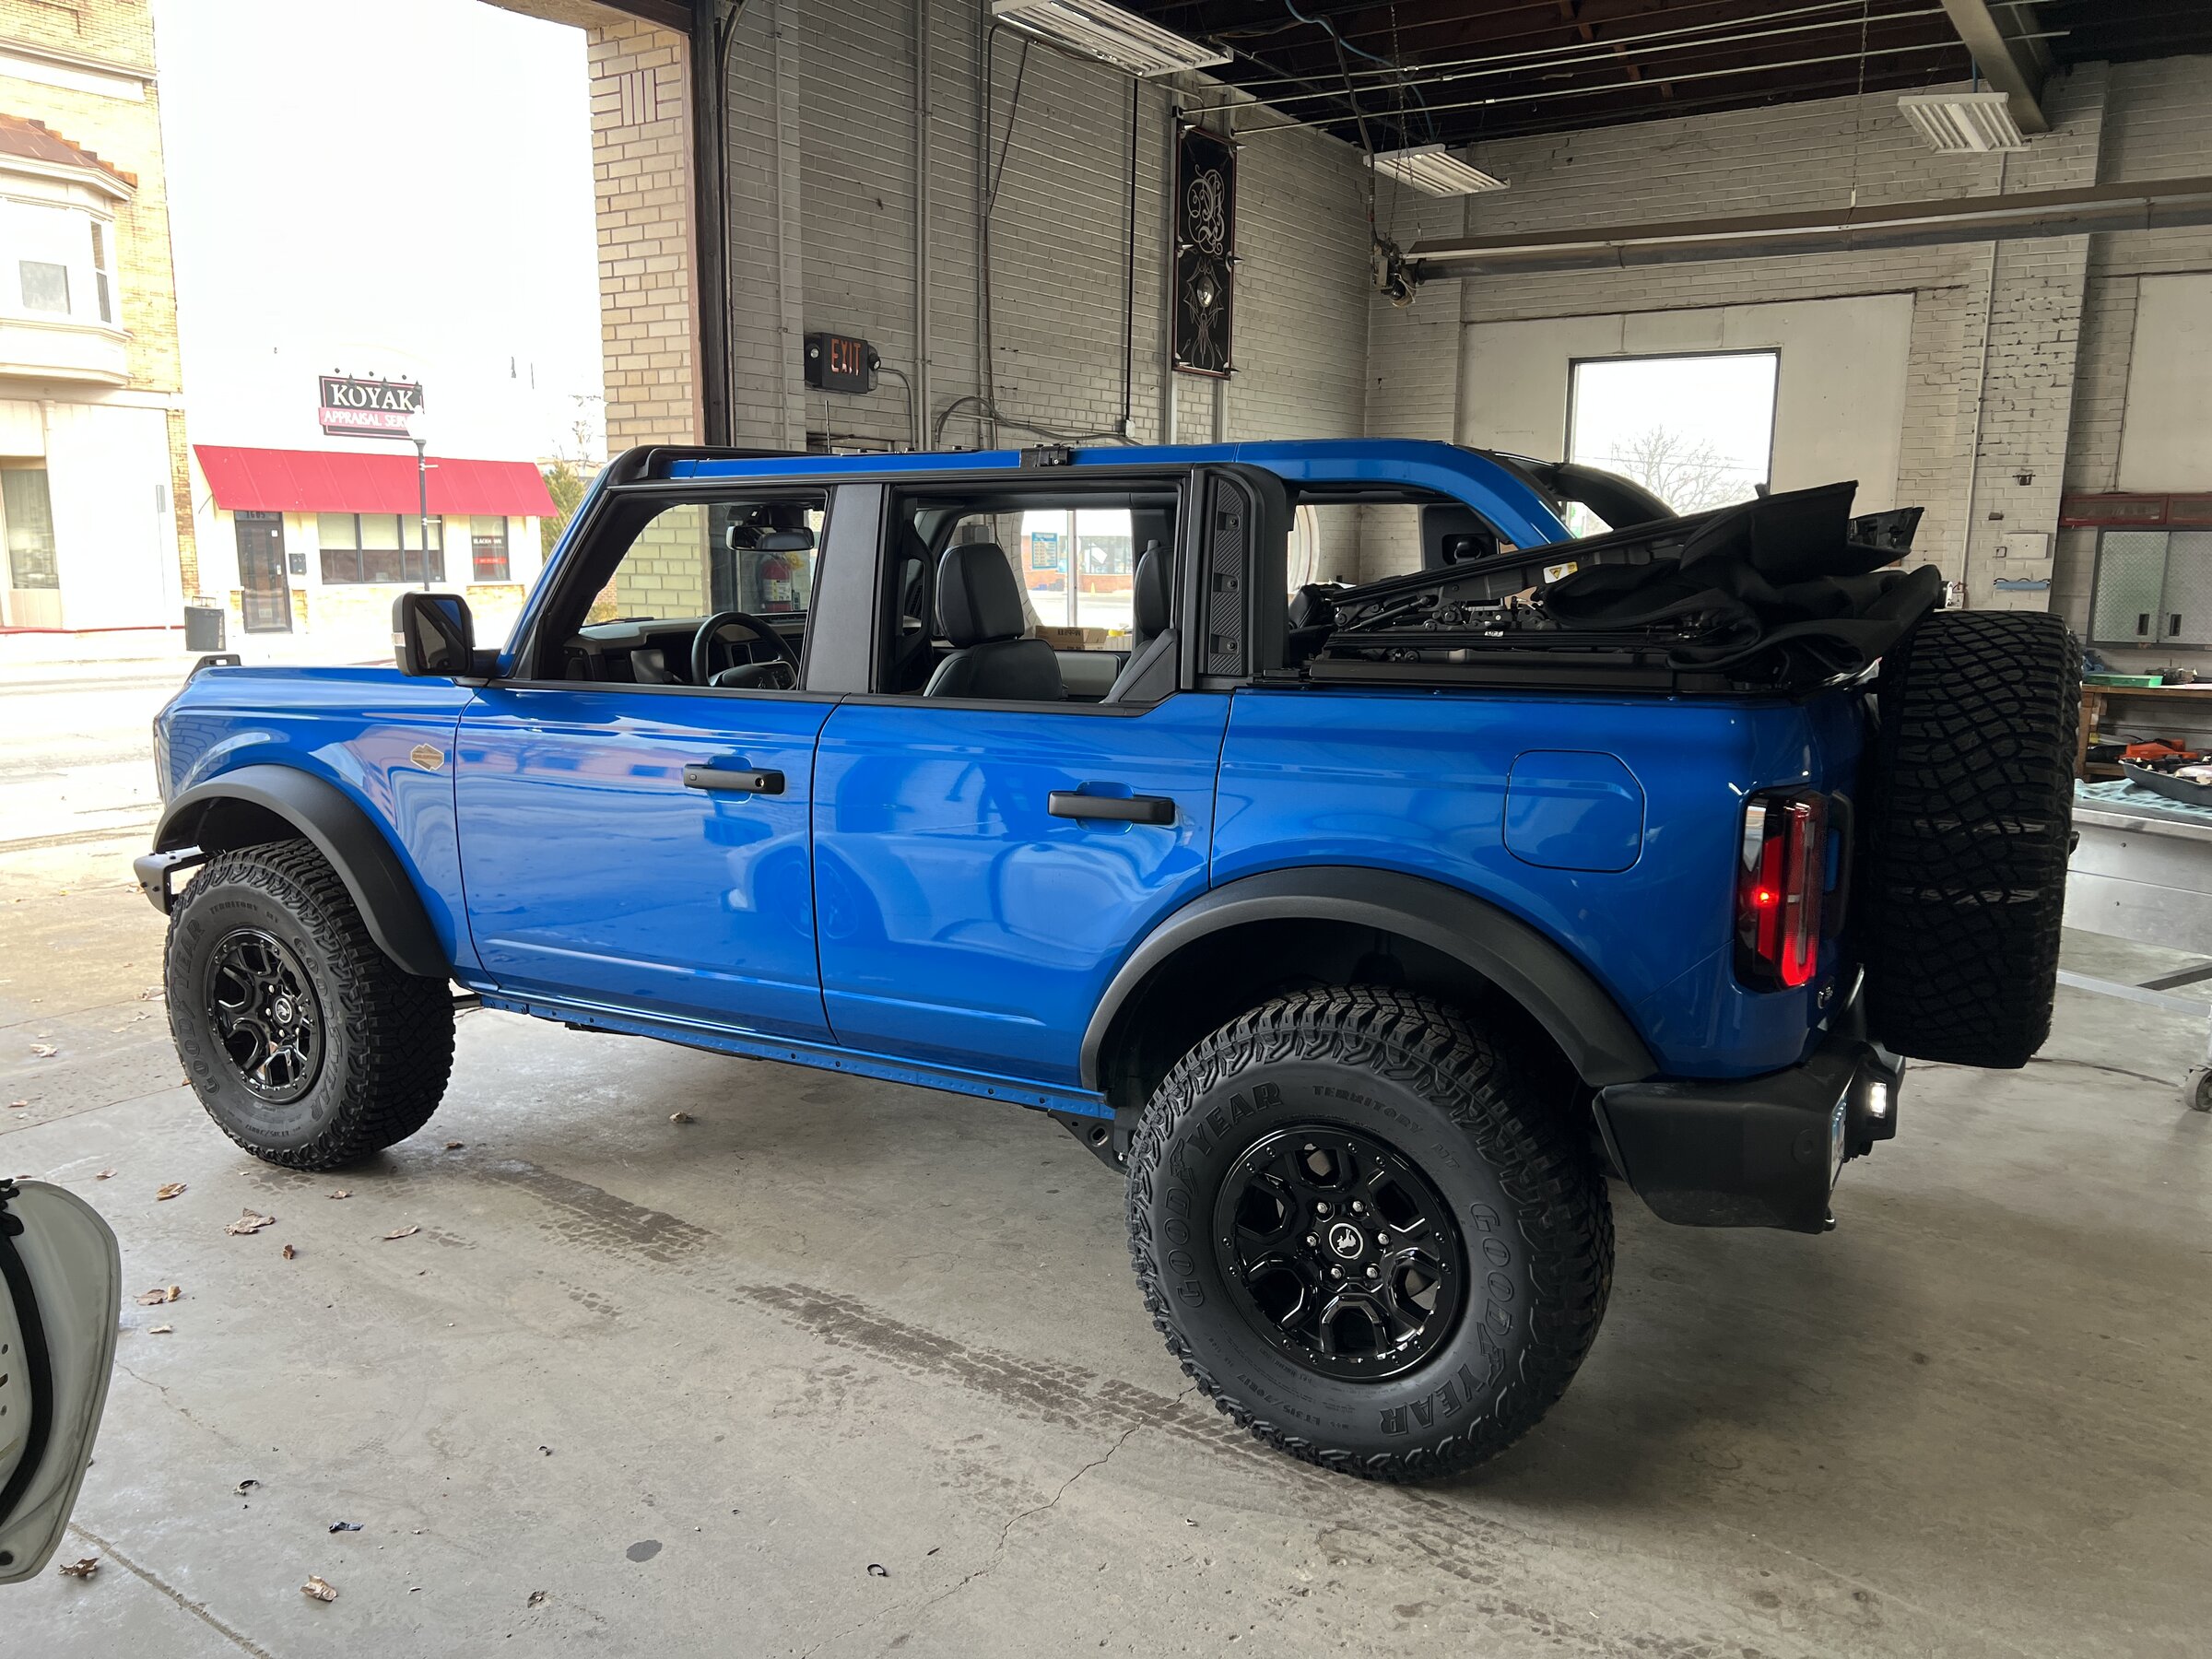 Ford Bronco SOLD - 2022 Ford Bronco Wildtrak Velocity Blue Lux Leather MOD Bumper Tow + Accessories IMG_6017.JPG